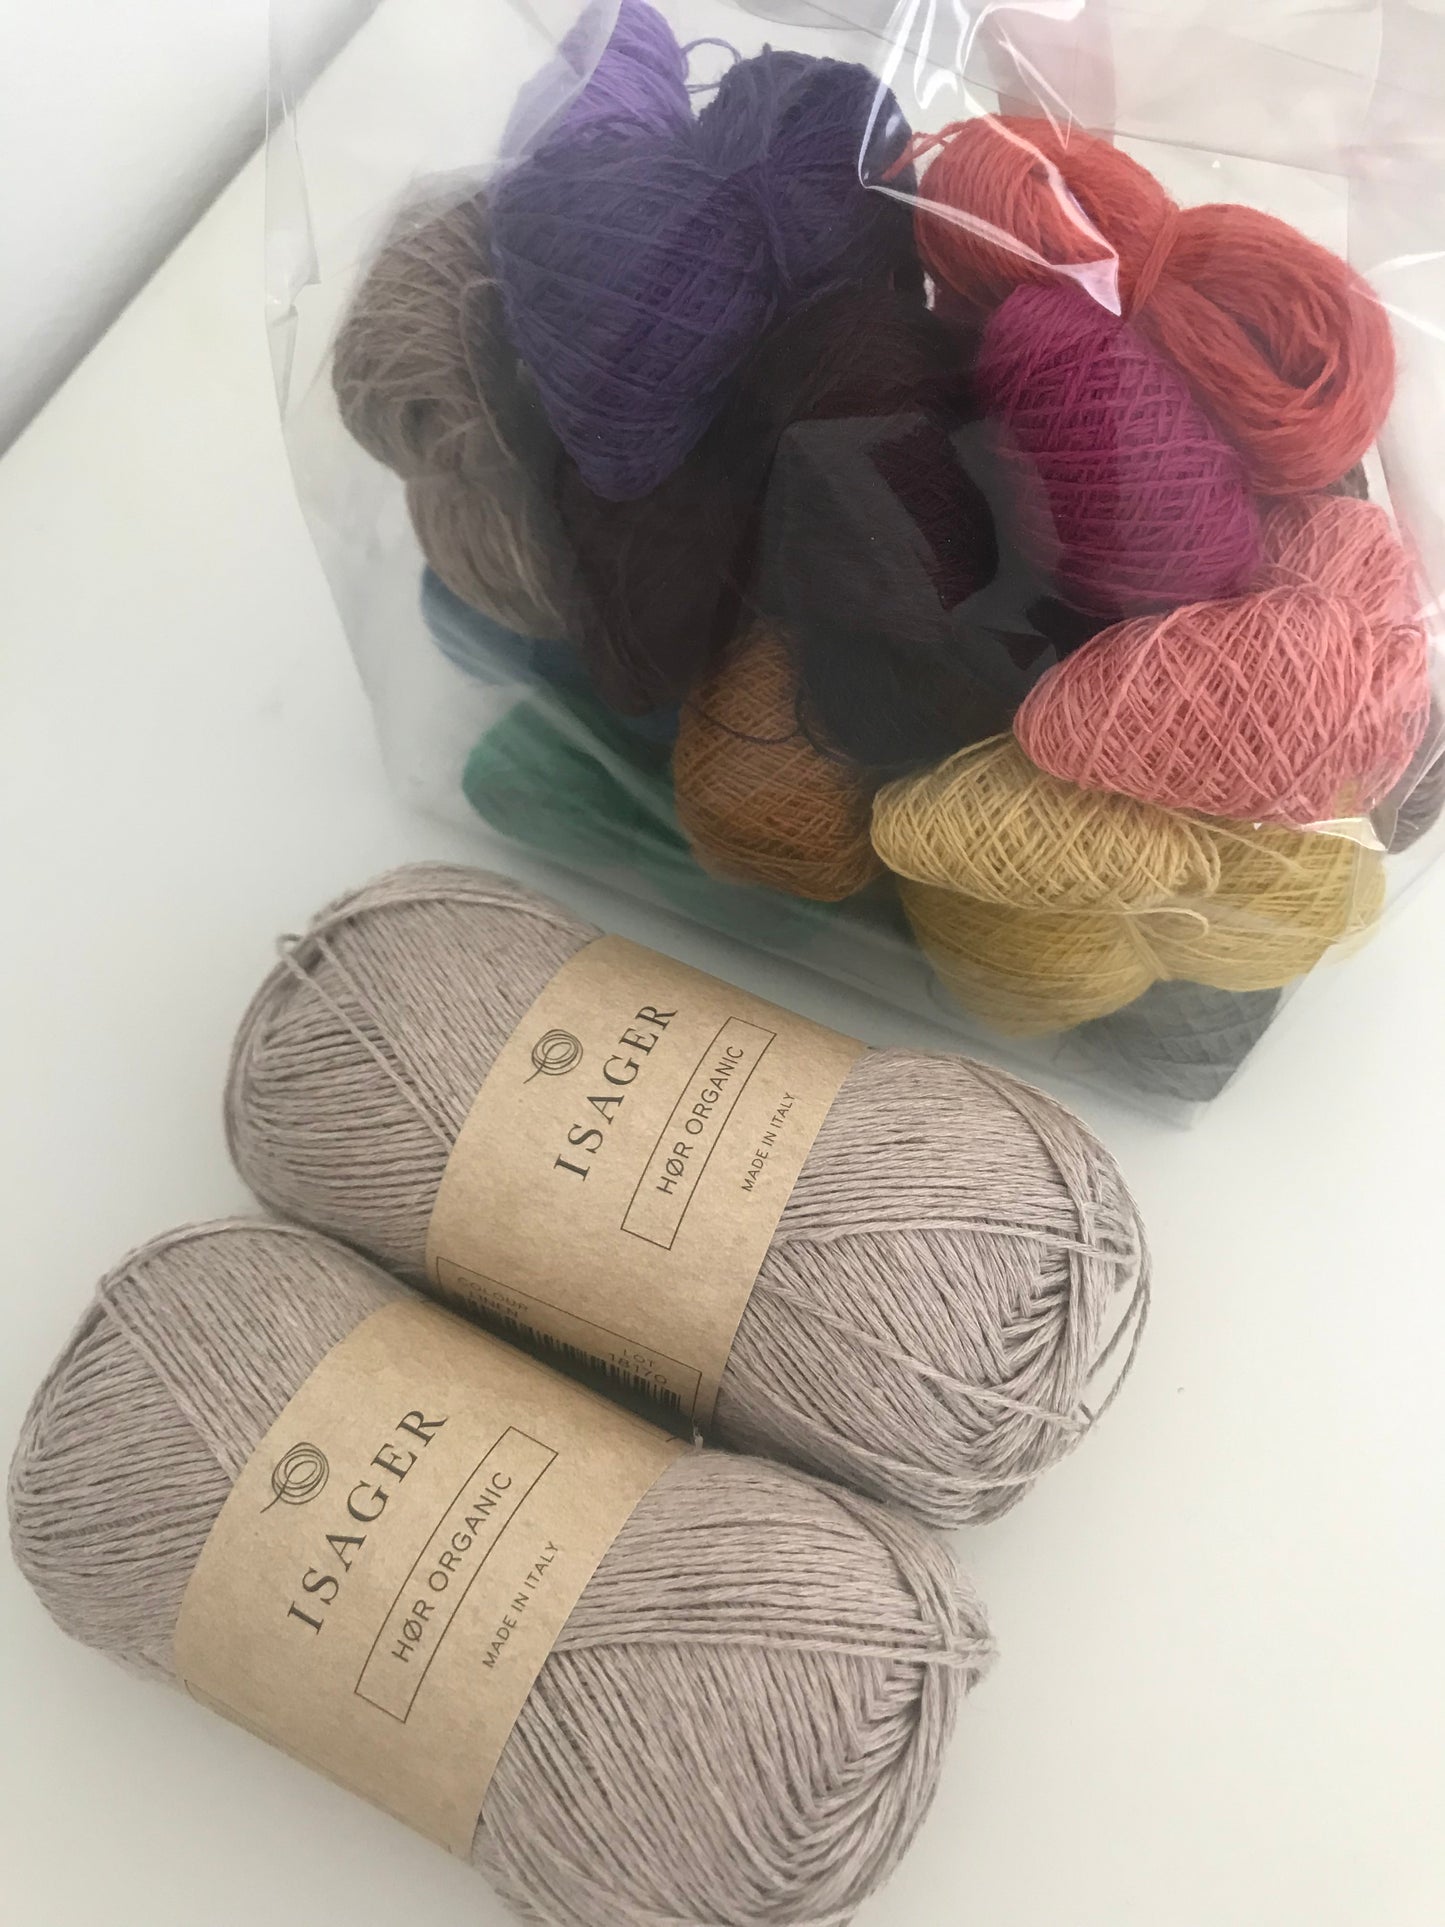 Yarn package for project bag